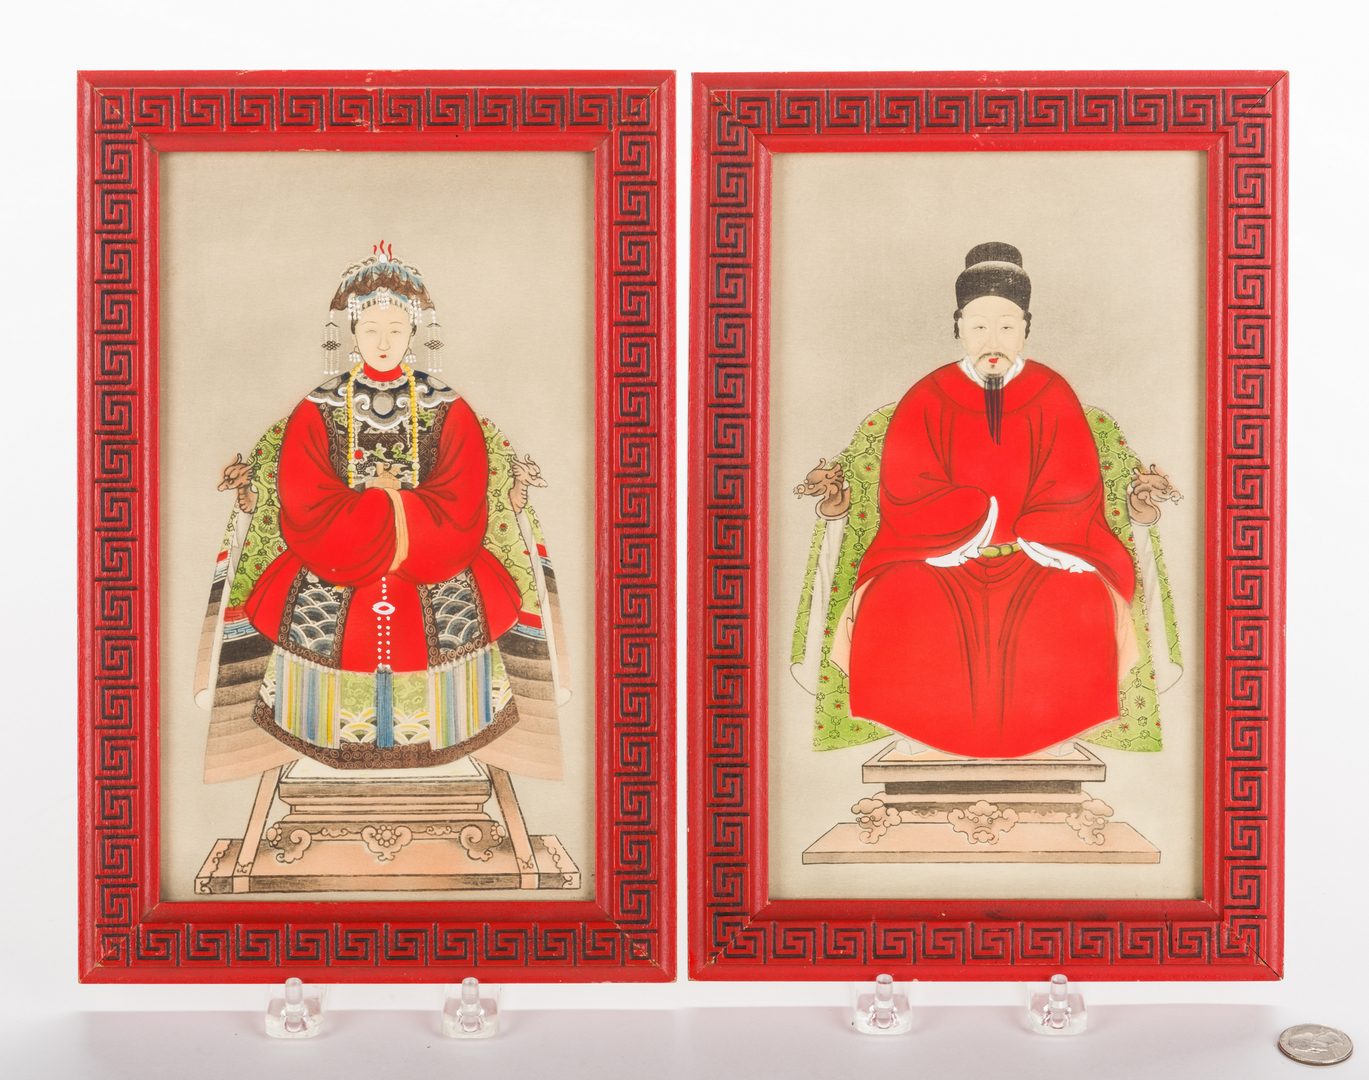 Lot 658: 4 Chinese Ancestor Portraits & 3 Asian Decorative Items, 7 items